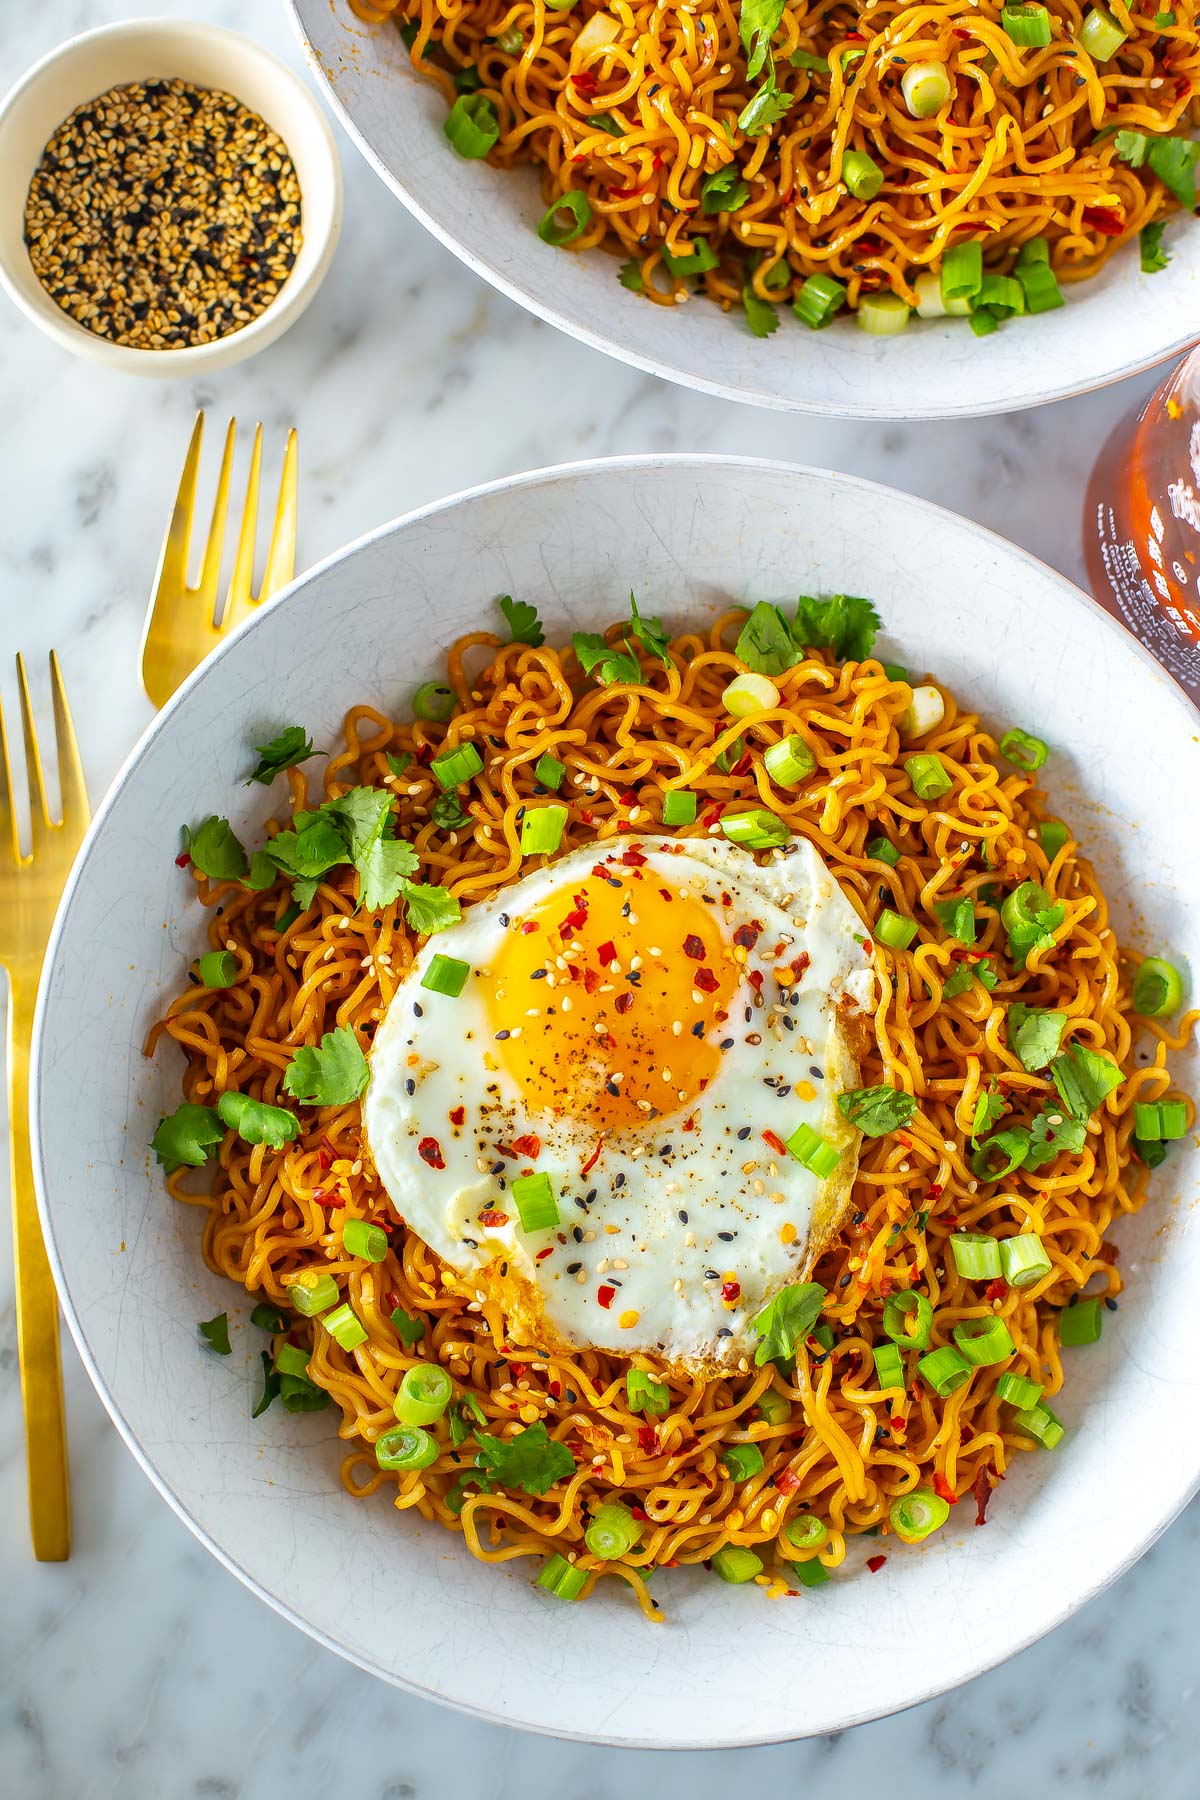 A bowl of spicy noodles topped with a fried egg, green onions and cilantro.